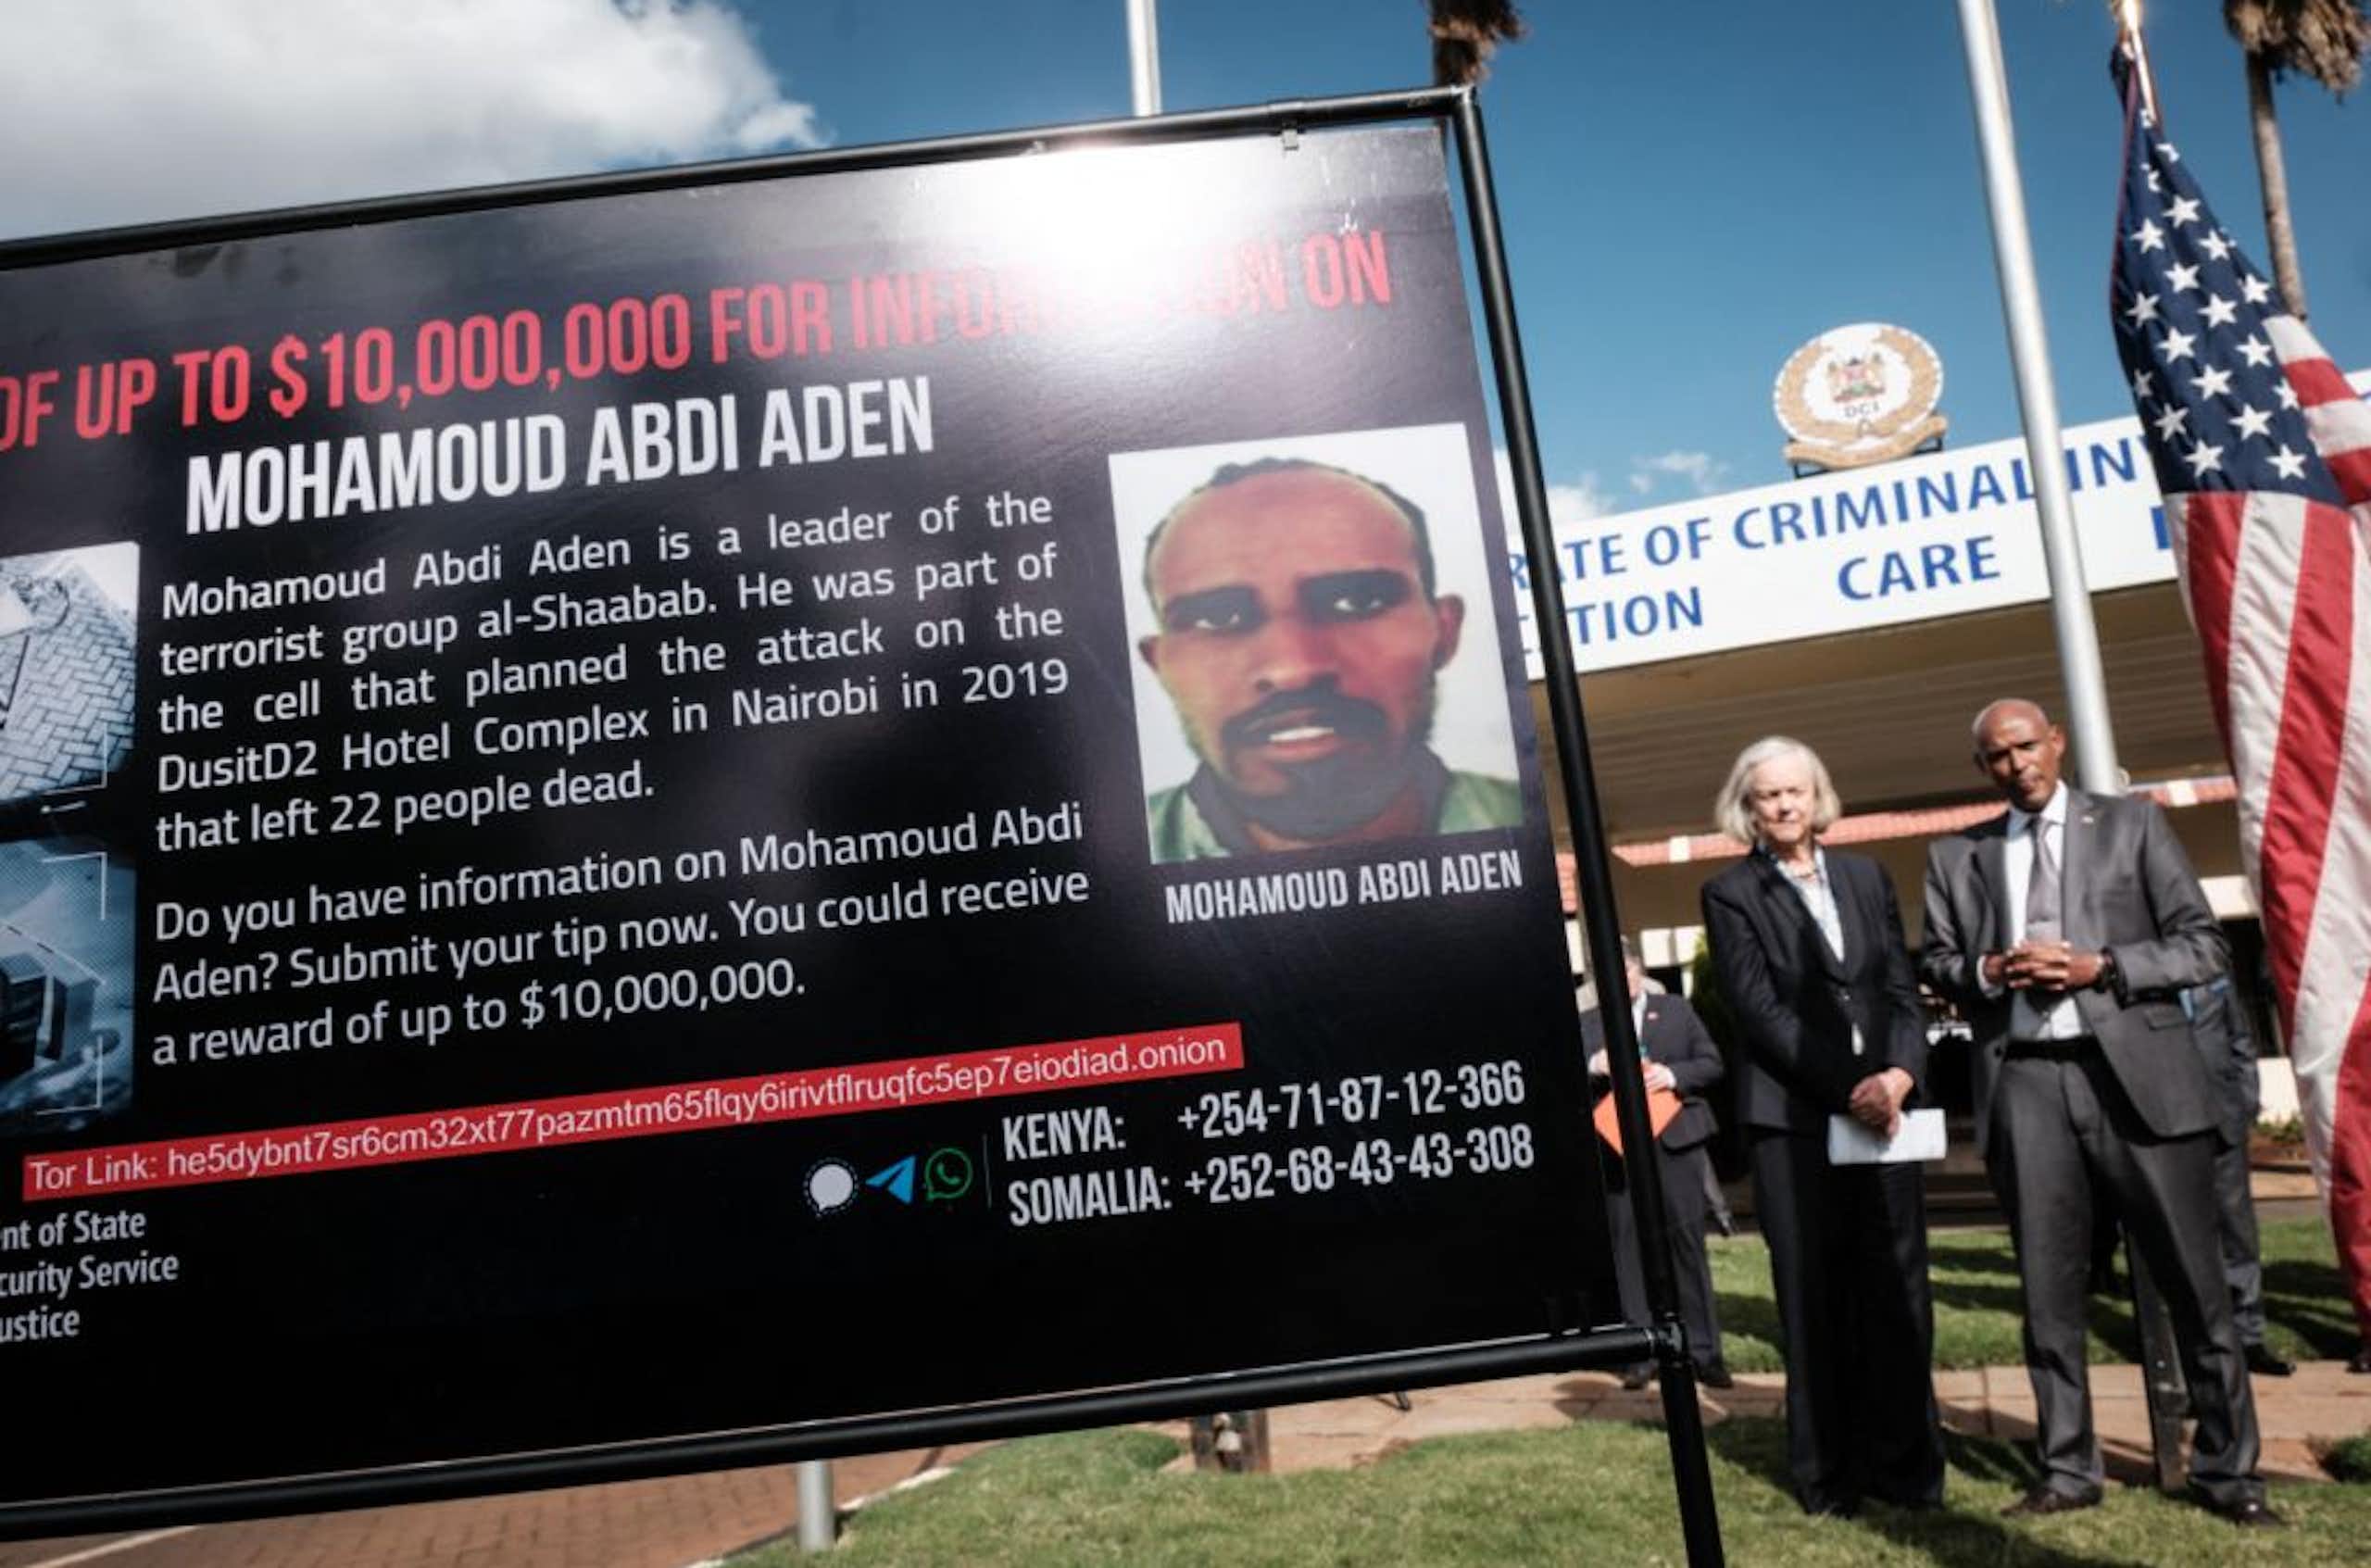 A man and woman standing in the background of a black poster announcing an award of up to US dollars 10 million for information on the leader of the terrorist group al-Shabaab